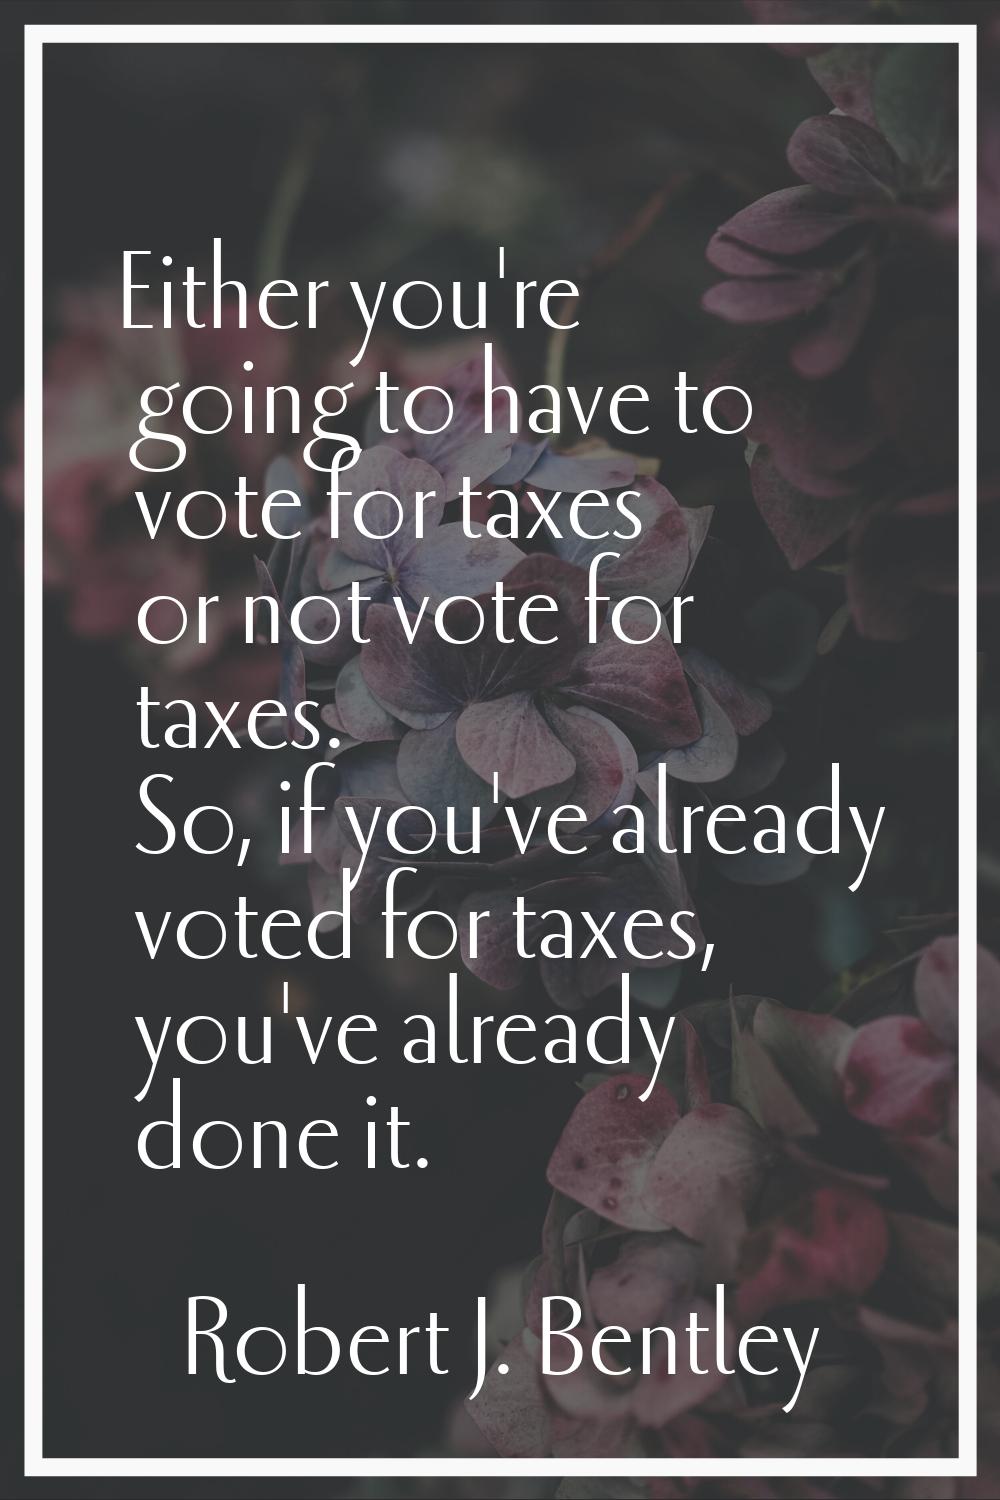 Either you're going to have to vote for taxes or not vote for taxes. So, if you've already voted fo